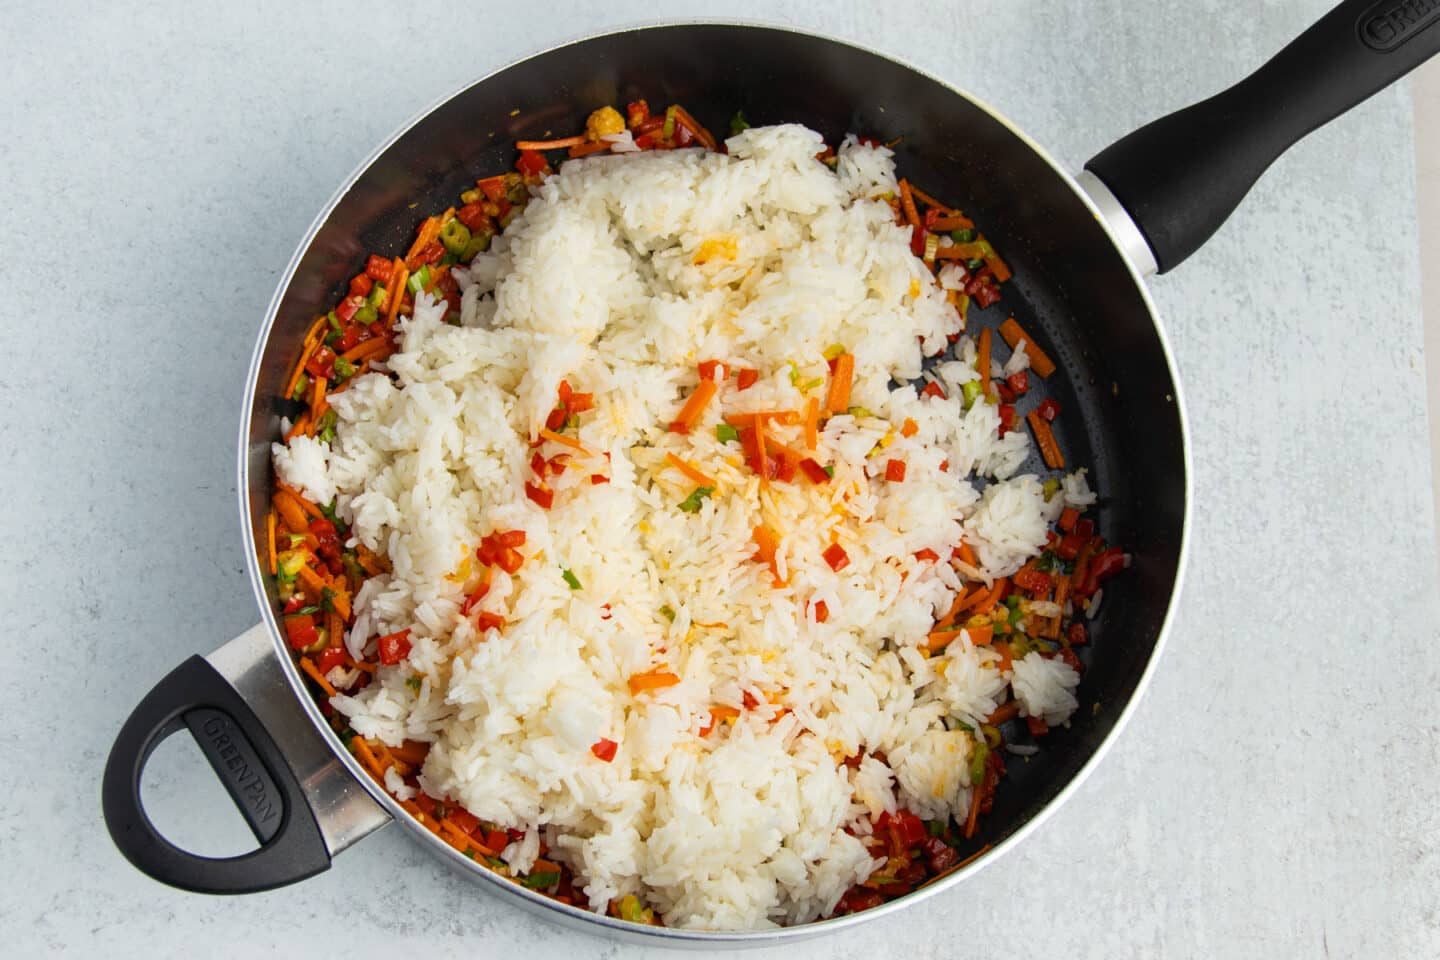 Picture of fried rice with cooked rice added.